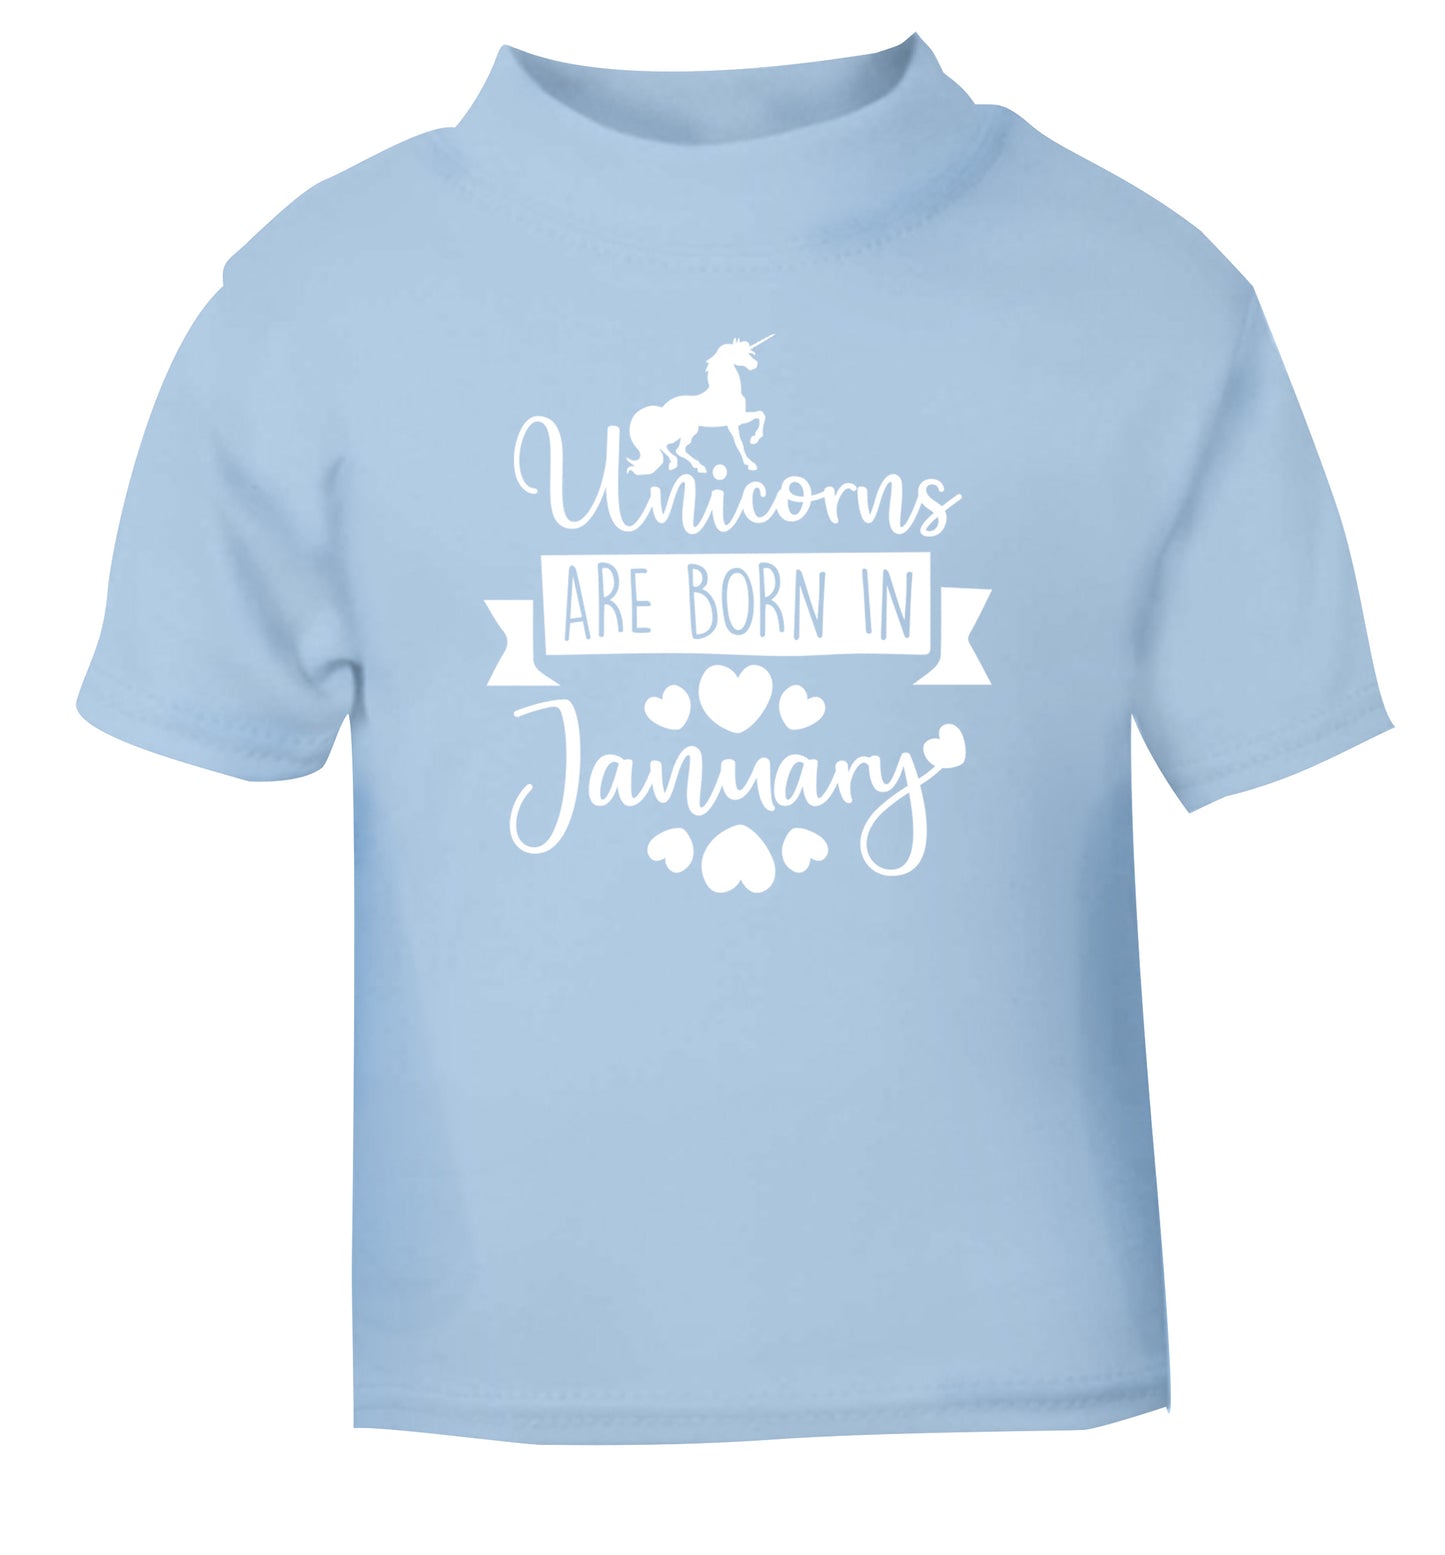 Unicorns are born in January light blue Baby Toddler Tshirt 2 Years